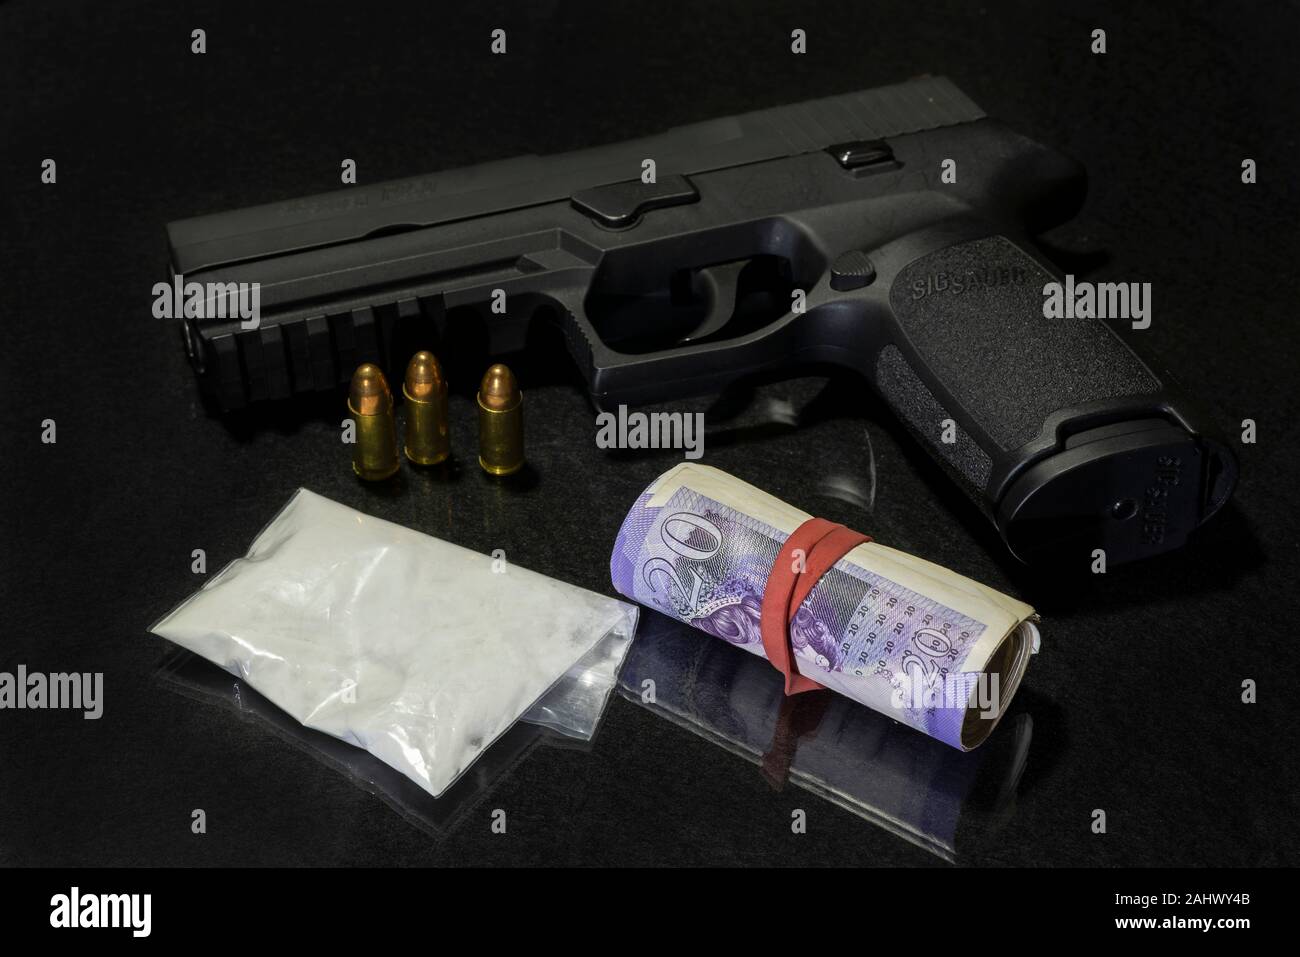 Bag of powdered drugs with a Sig Sauer handgun and a roll of  £20 pound notes (GBP)  on a black background. Stock Photo